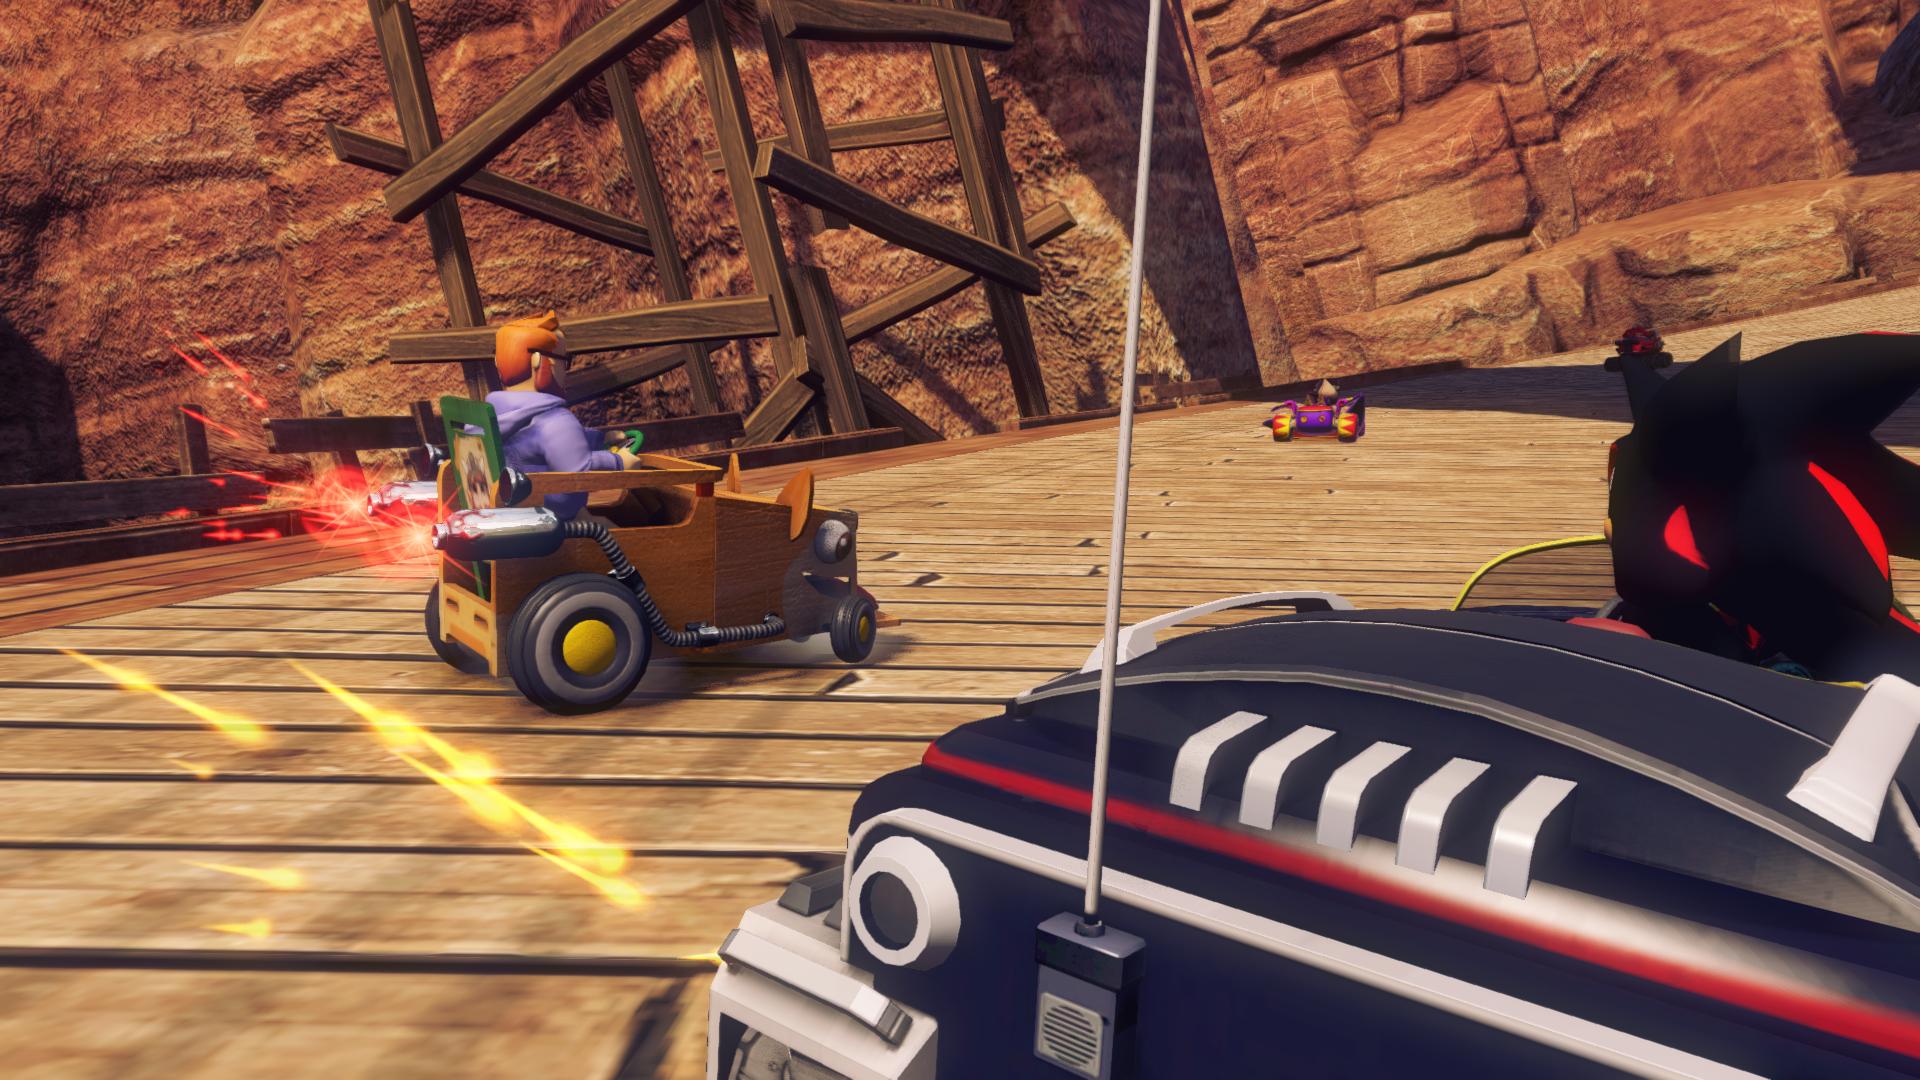 Sonic and All-Stars Racing Transformed - Yogscast DLC Steam Gift [USD 51.92]